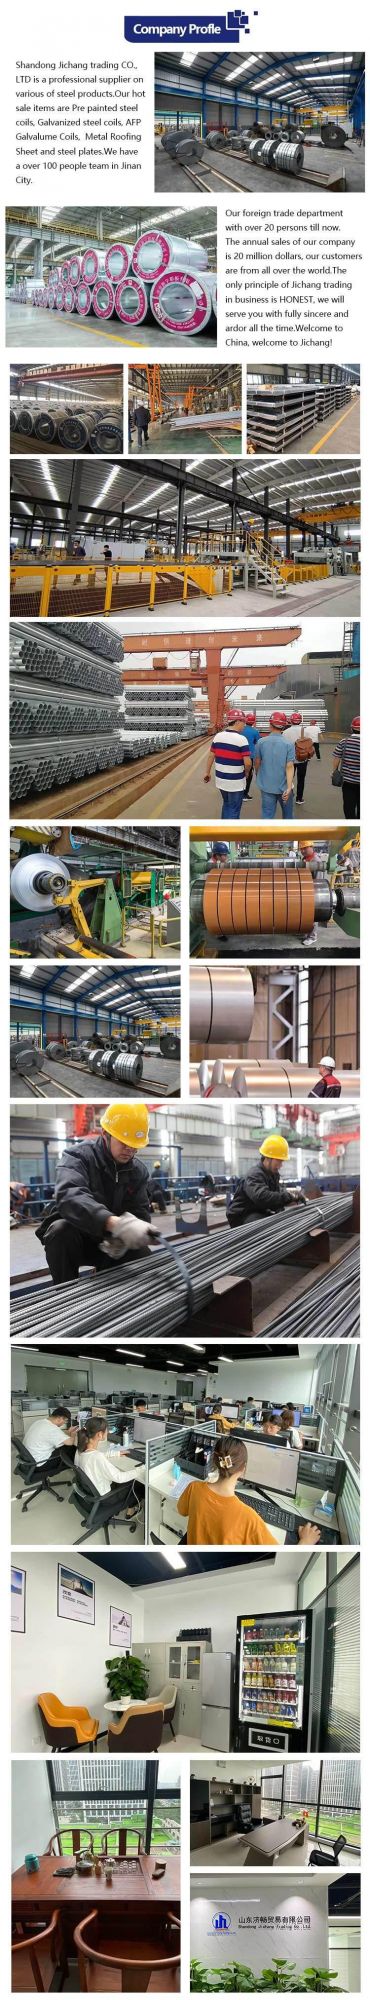 0.12-2mm Thick Hot DIP Galvanized Steel Coil, Gi Steel Coil Price